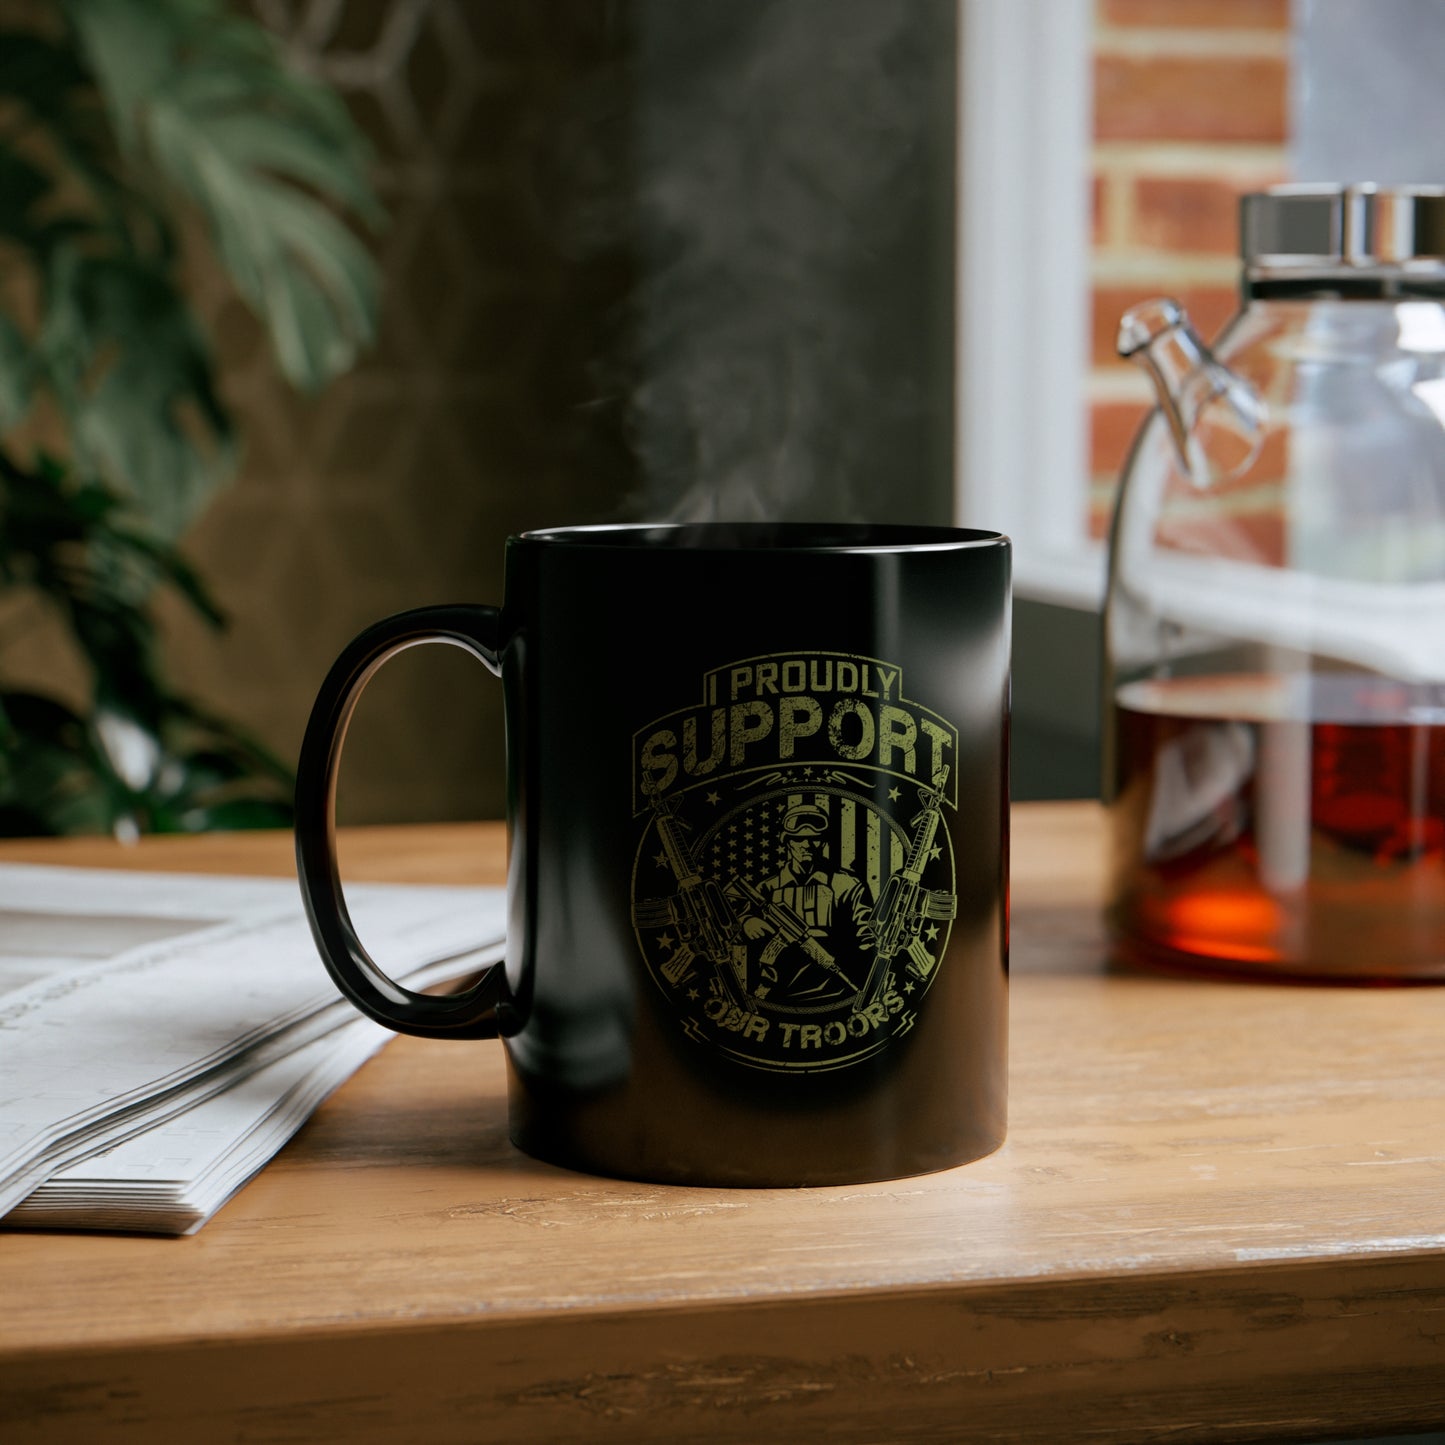 I Proudly Support Our Troops Mug